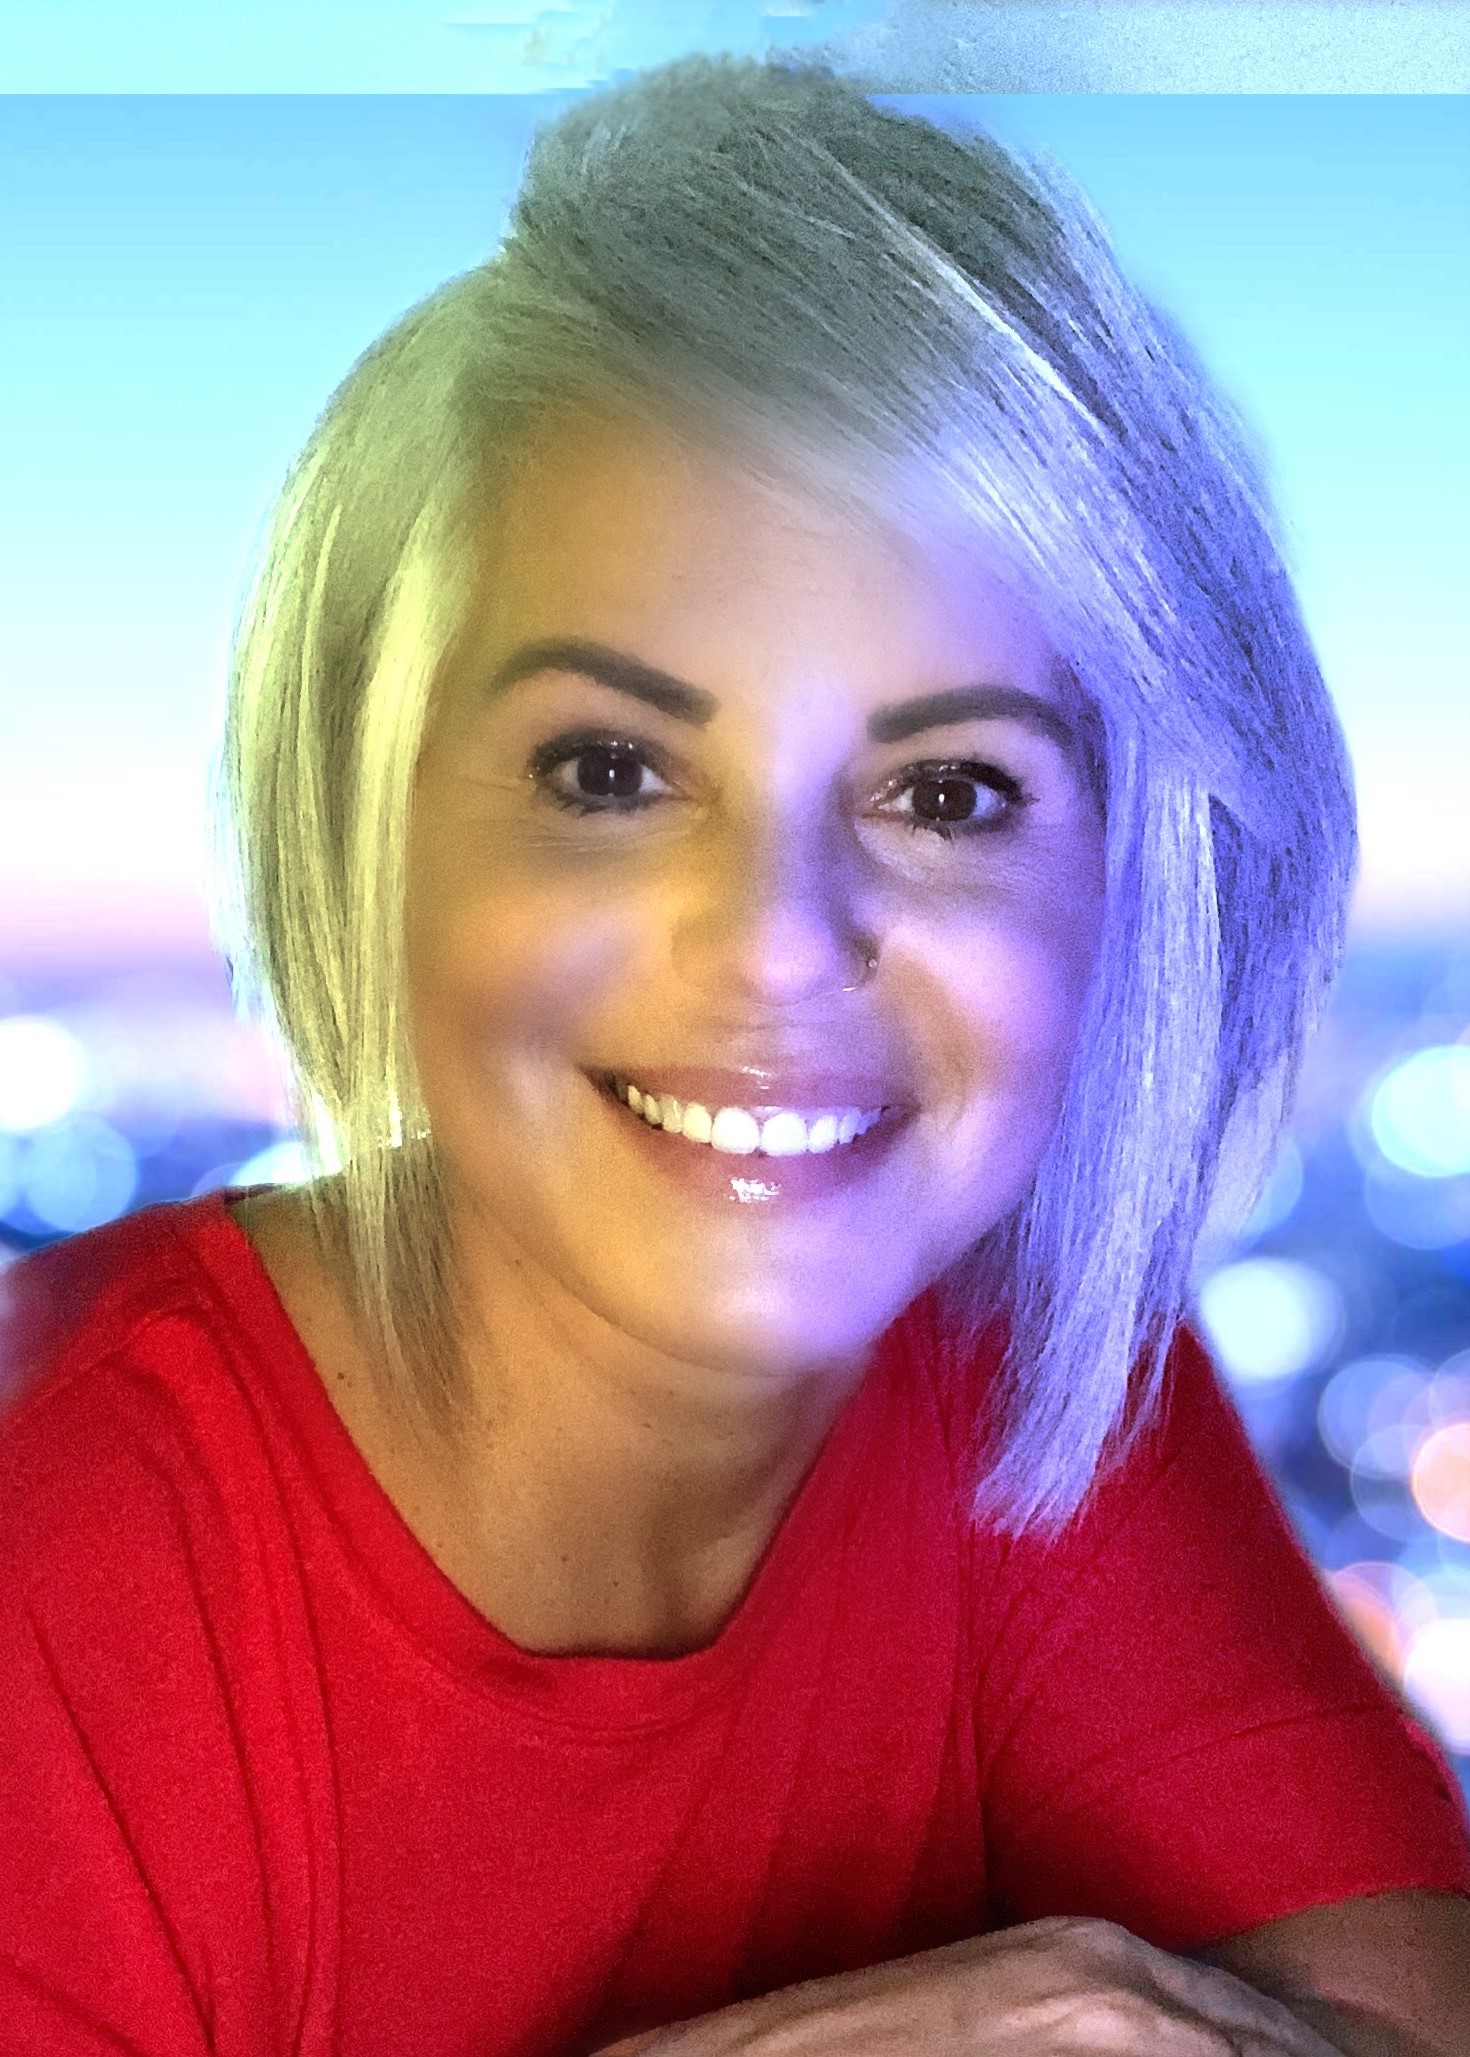 A woman with white hair smiling for the camera.